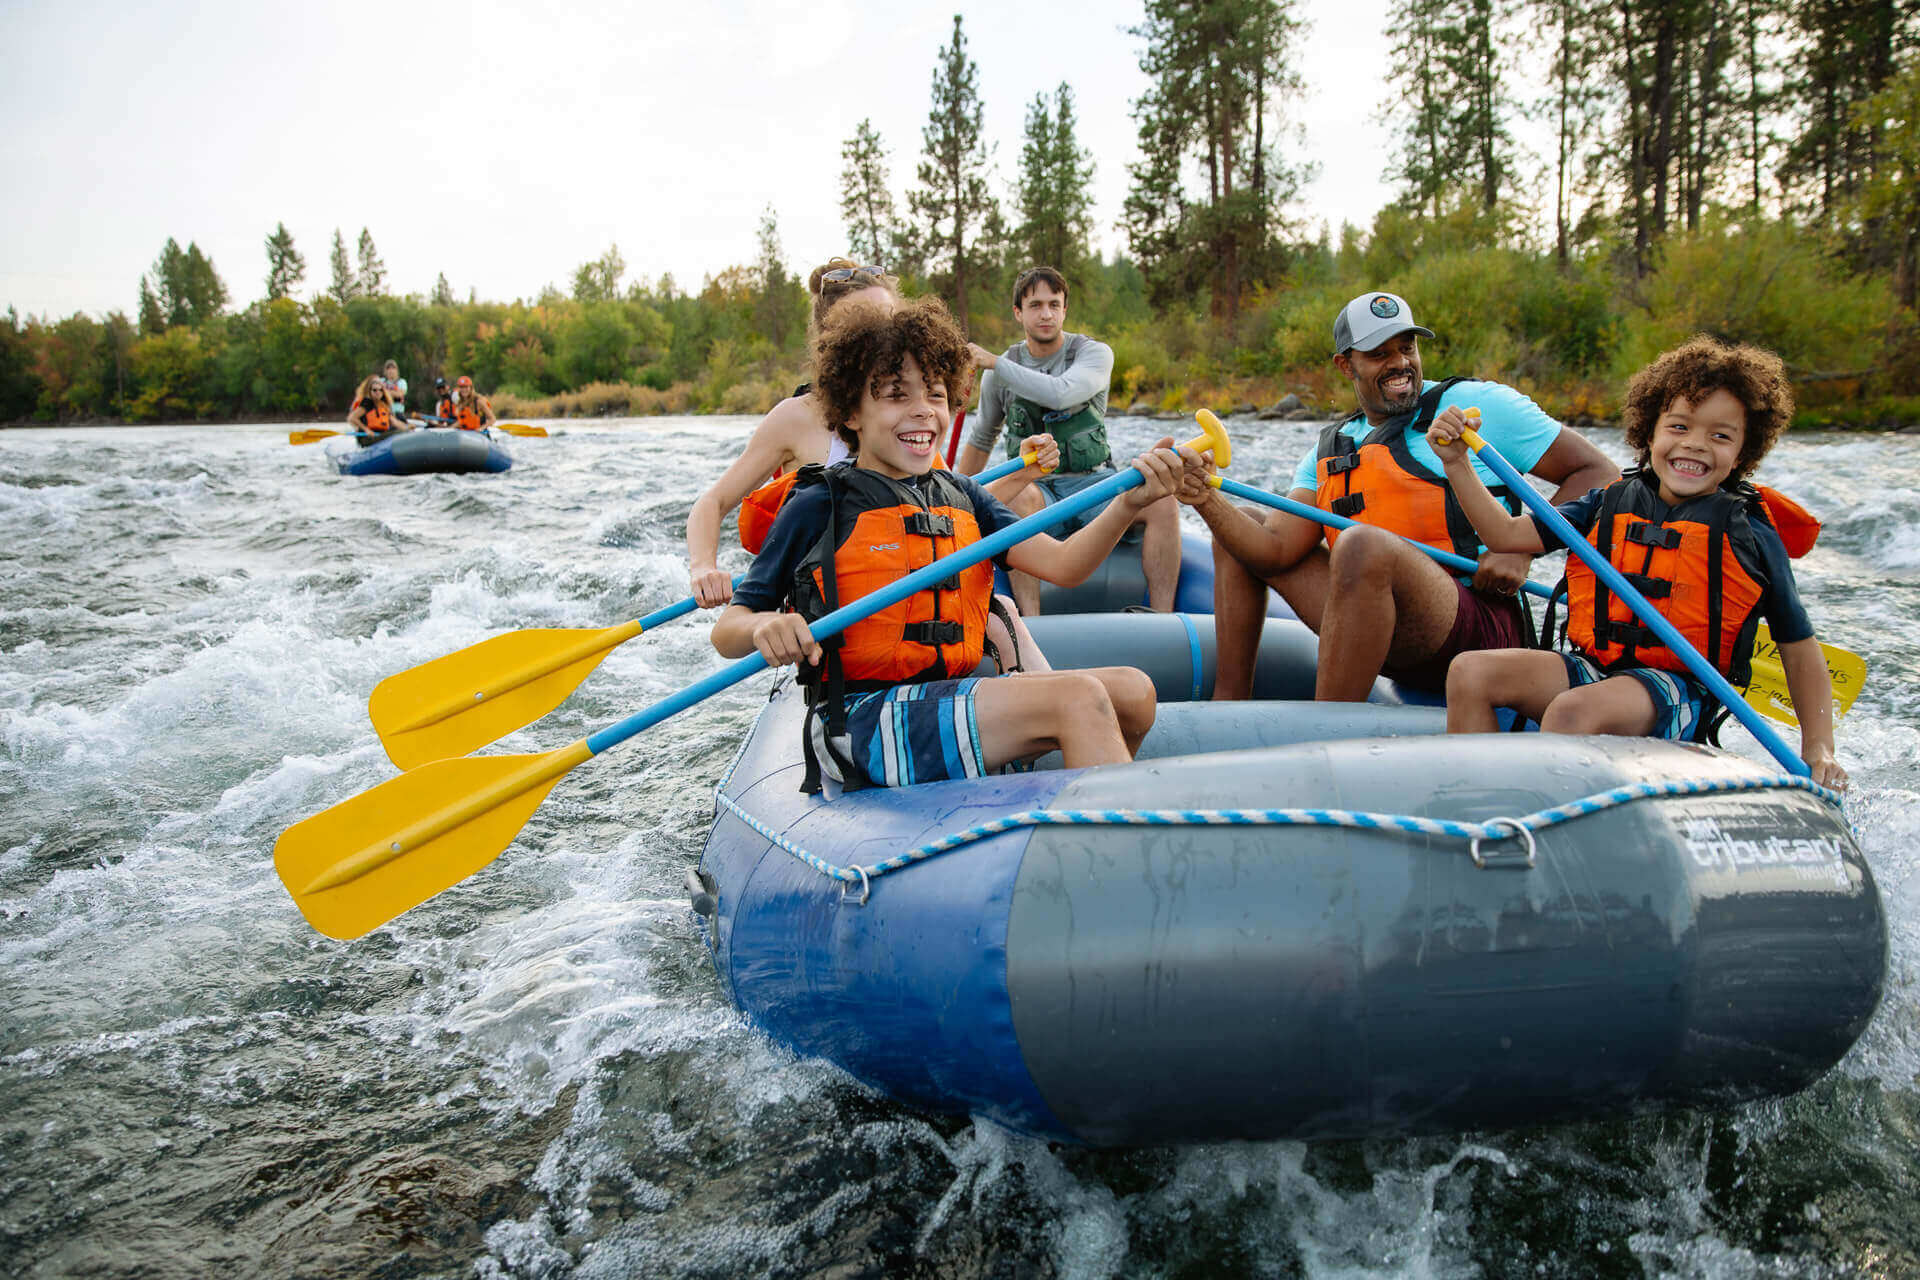 Things to do with kids in Washington: A family rafts a river near Spokane.